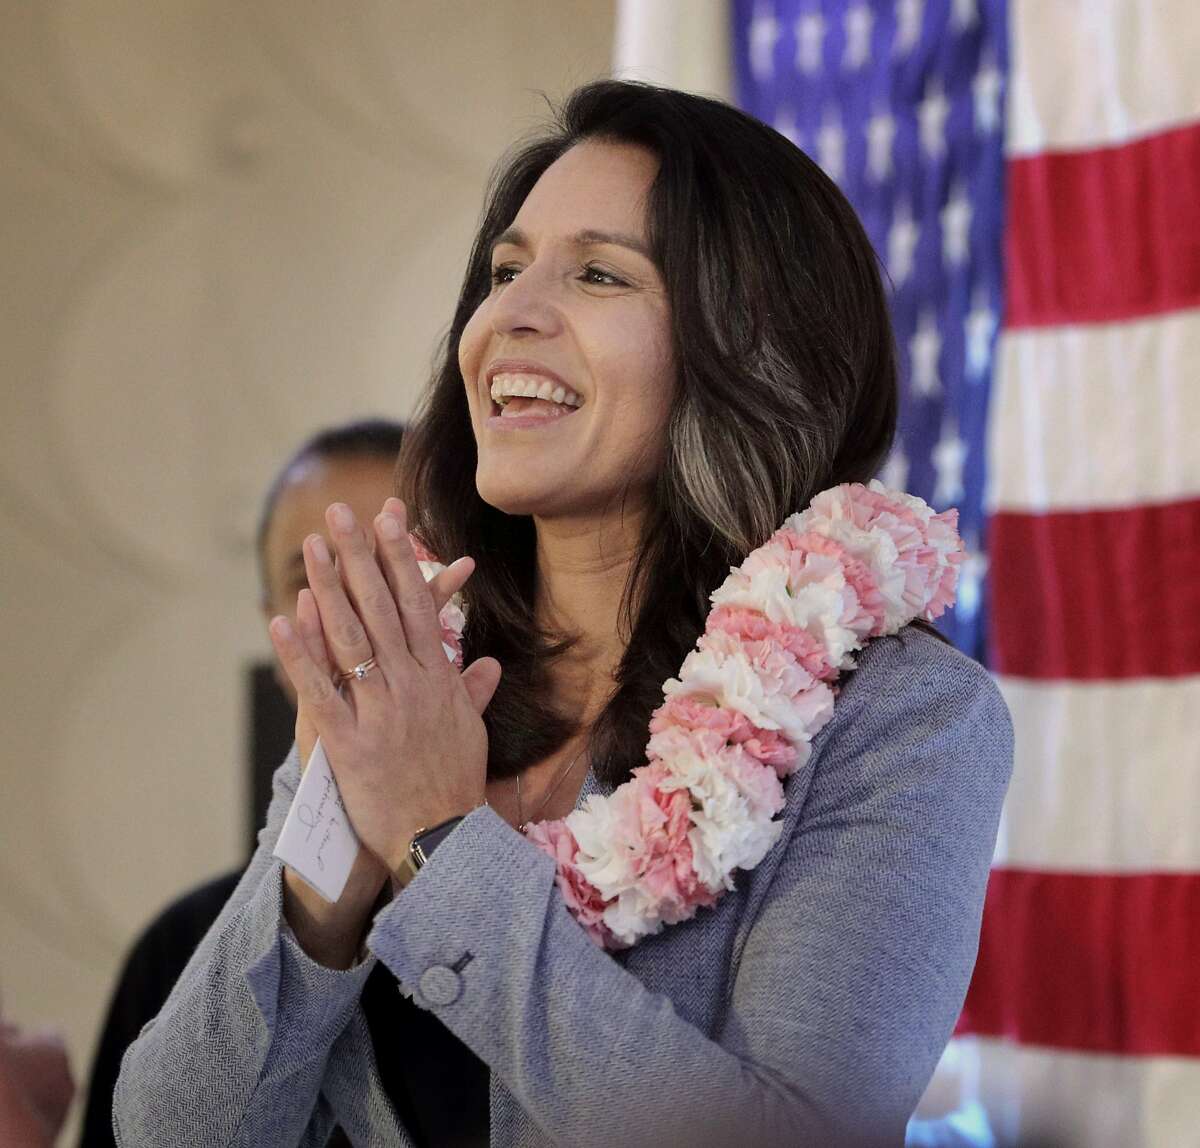 U.S. Rep. Tulsi Gabbard reacts to the applause as she takes the stage during a town hall meeting held by the 2020 candidate for president, in Fremont, Calif., on Sunday, March 17, 2019. Gabbard who represents the 2nd congressional district in Hawaii, is a former veteran and served several tours in Iraq.